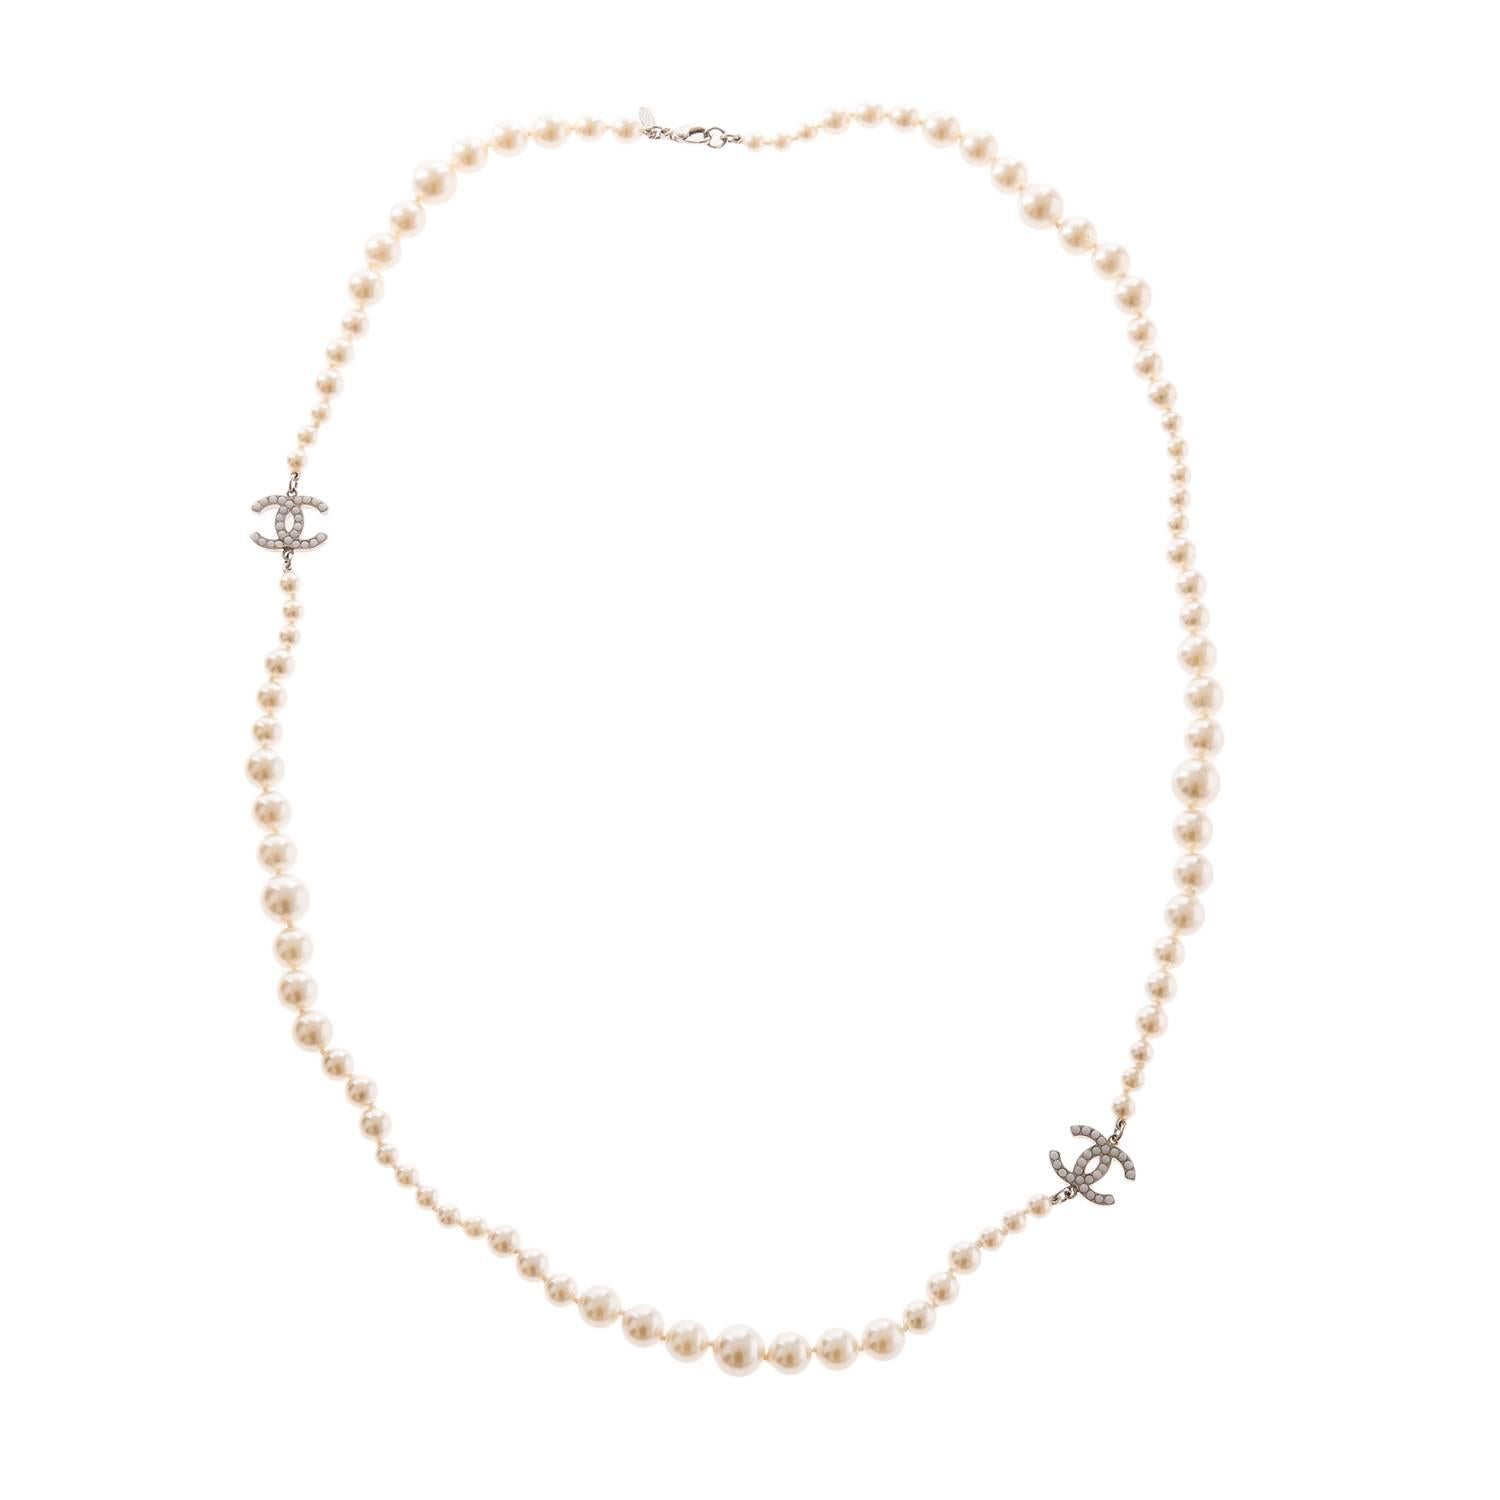 Chanel necklace of graduated faux pearls and two silver tone and pearl embedded charms with lobster claw closure.

Collection: Stamped 09V (for 2009)

Condition: Mint; all pearls intact; hardware is bright and shiny with no visible scratches;